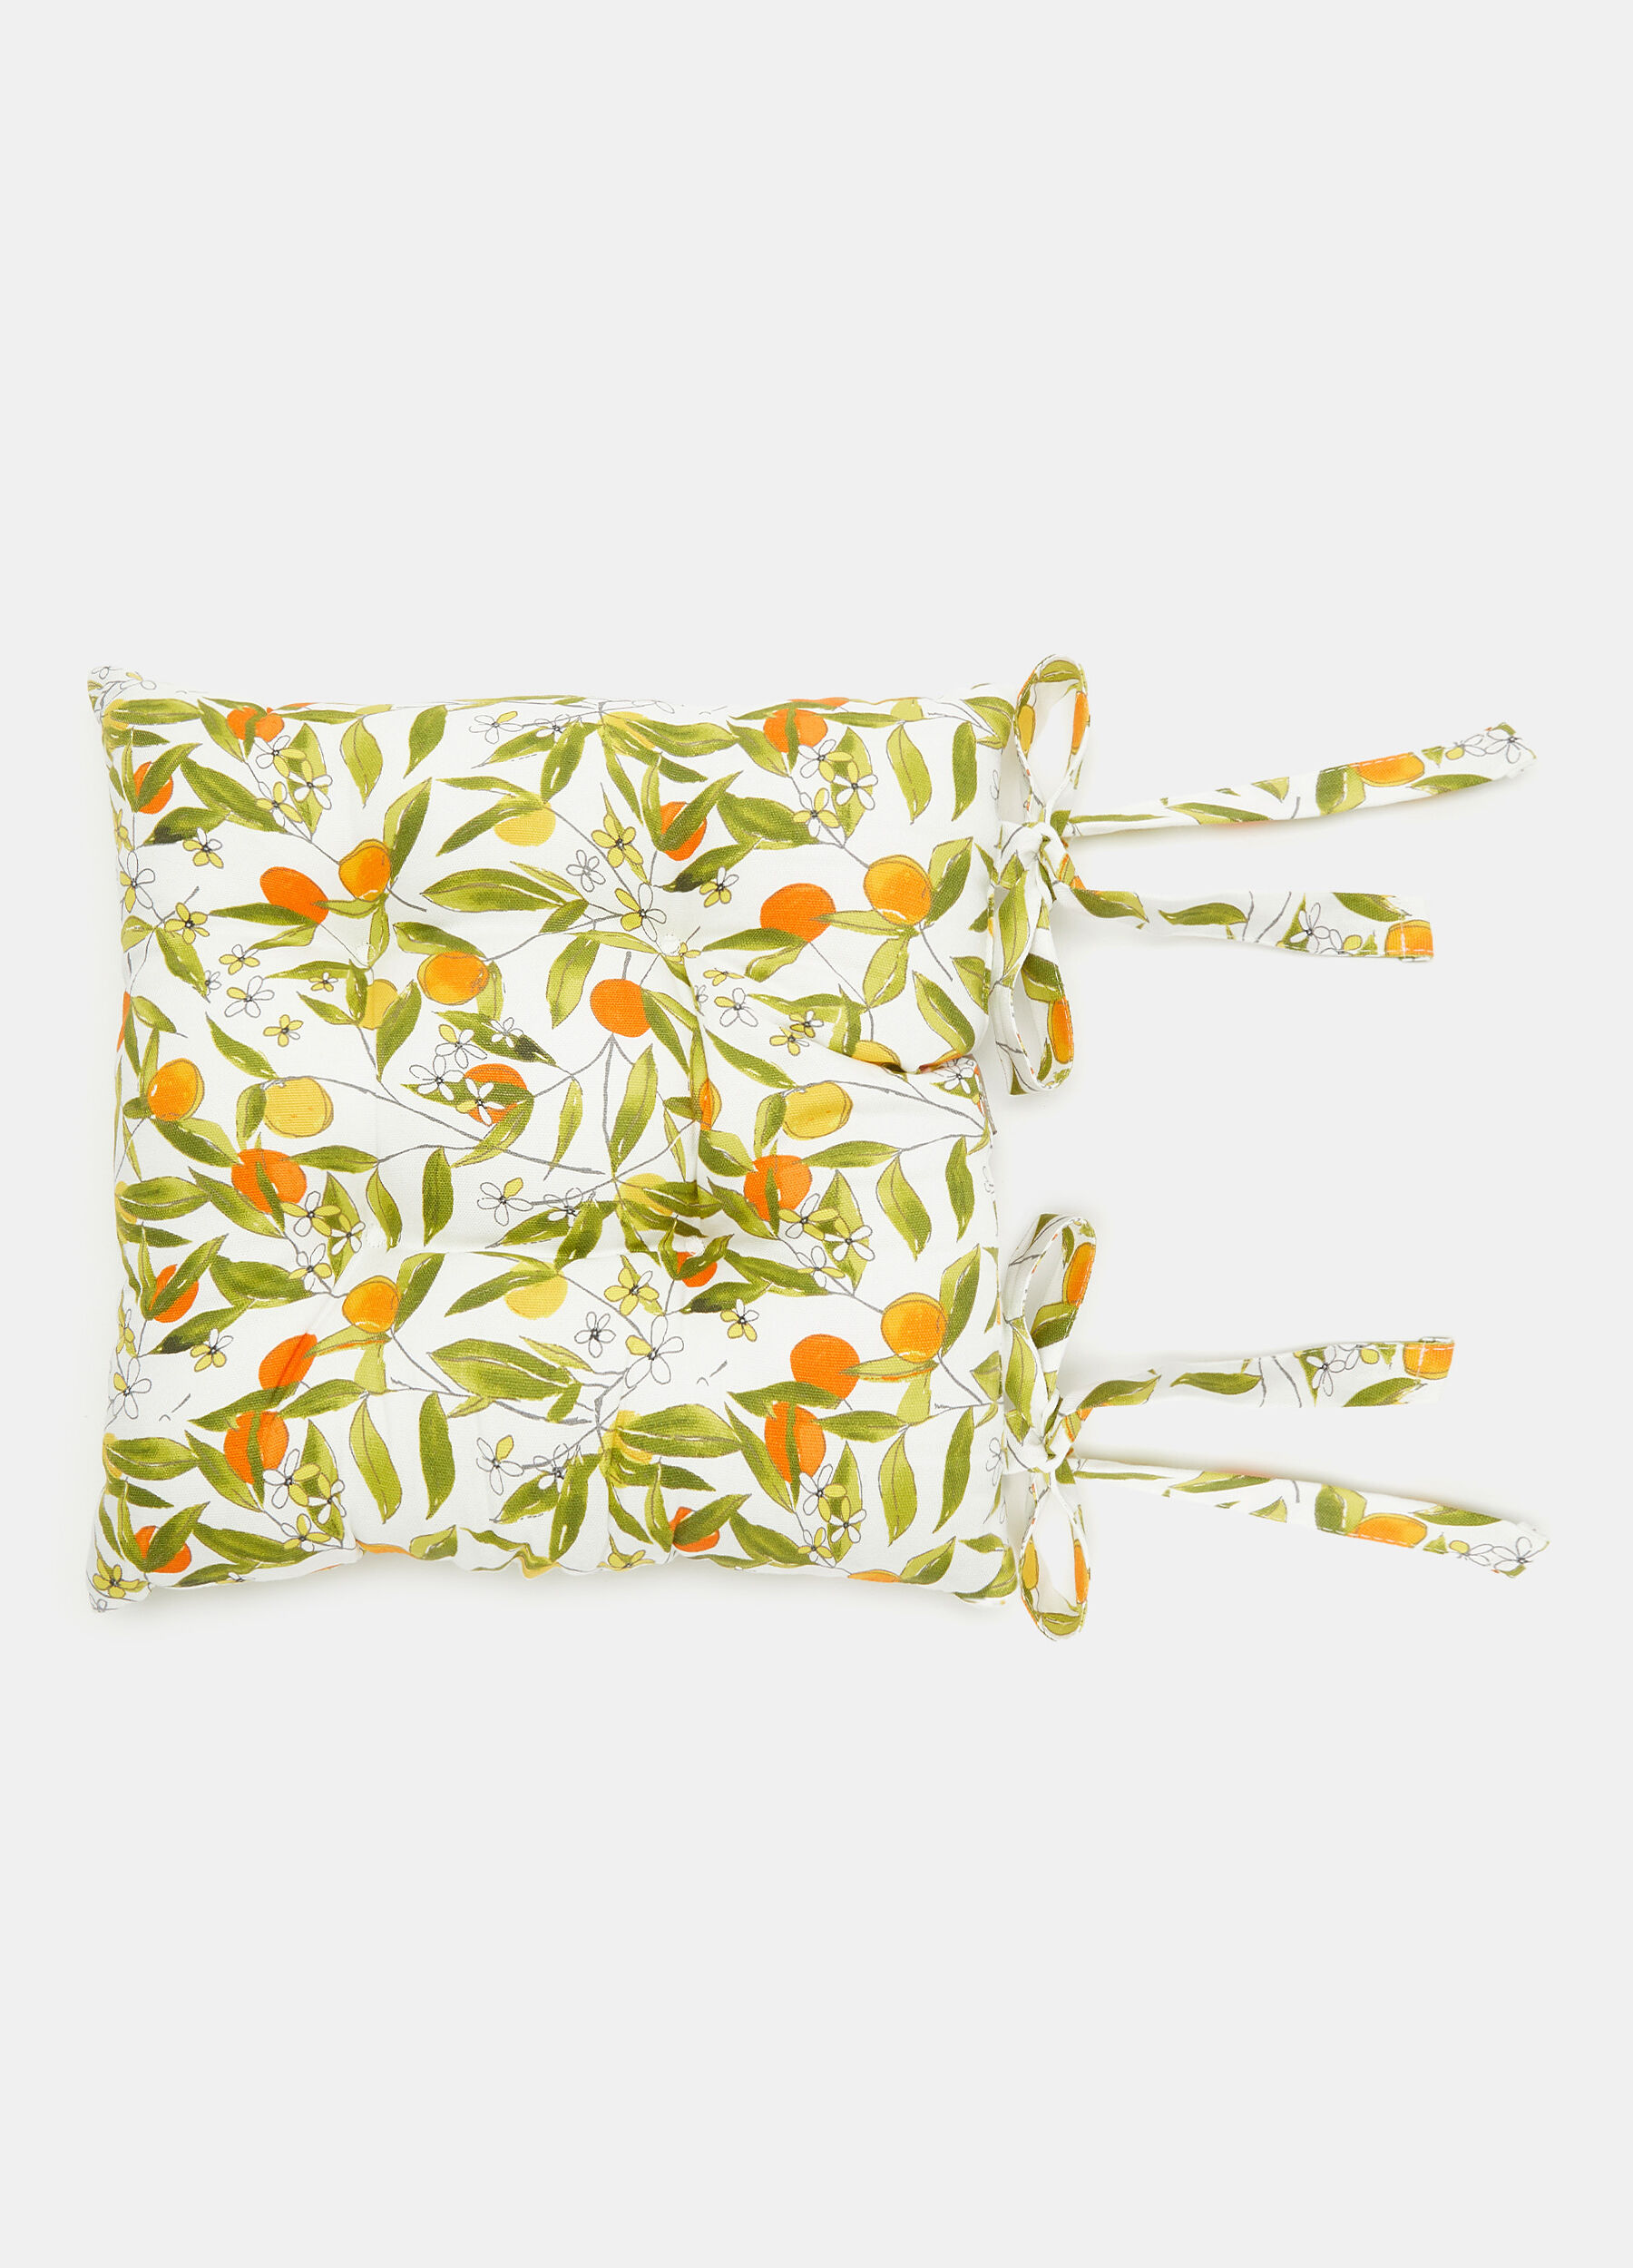 Square seat pad with citrus fruits print